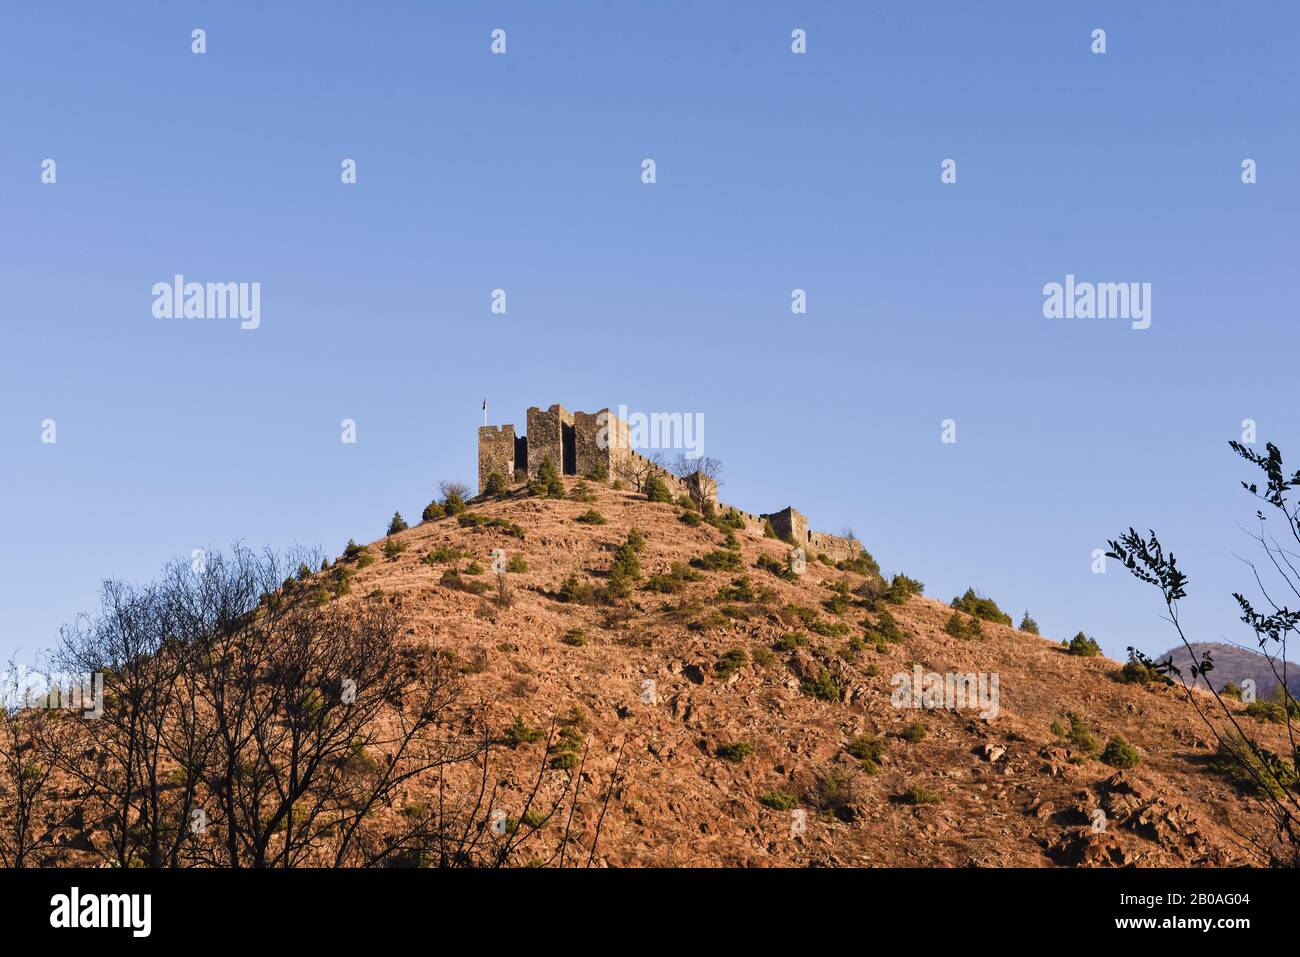 Wider image of Maglic castle standing on top of the hill near Kraljevo in Serbia during the sunny autumn day Stock Photo